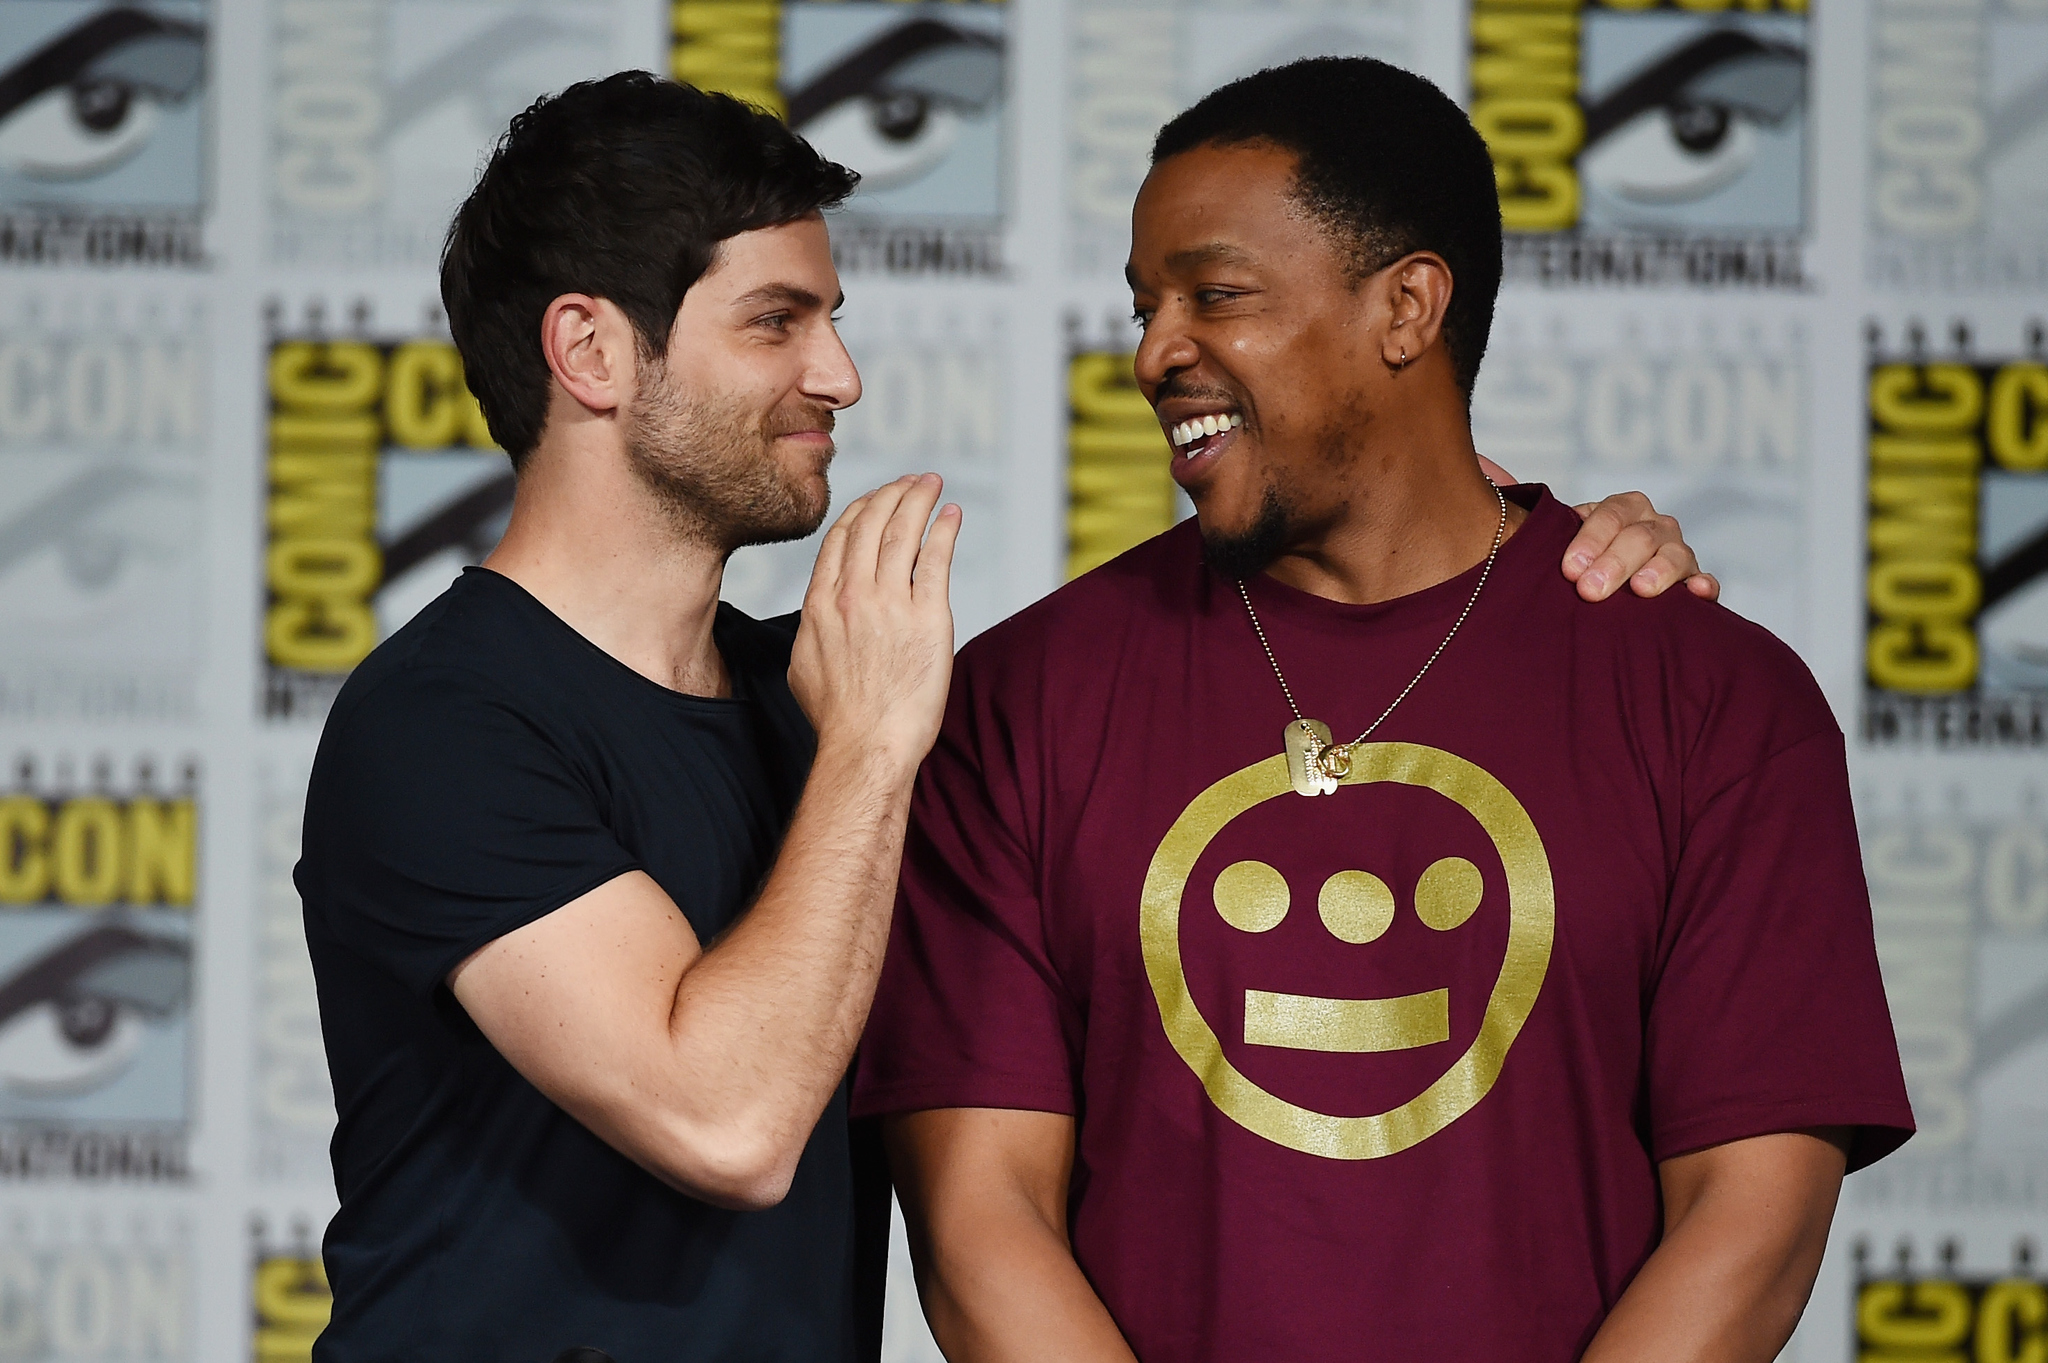 Russell Hornsby and David Giuntoli at event of Grimm (2011)